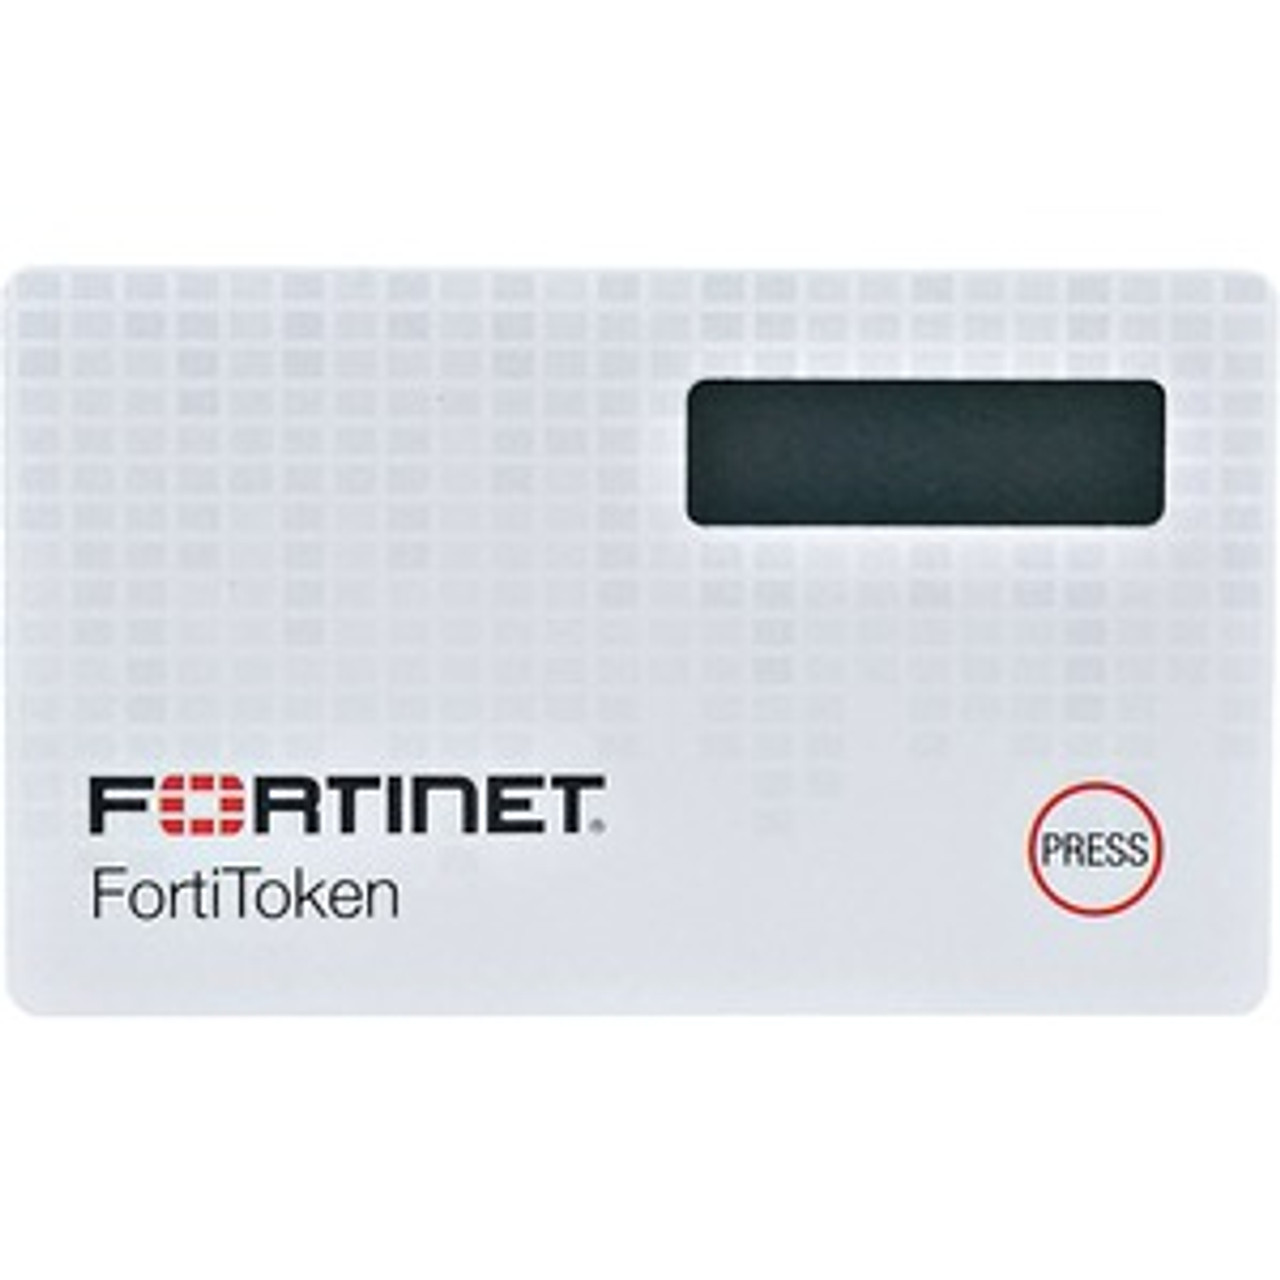 FTK-220-50 Fortinet One-Time Password Token